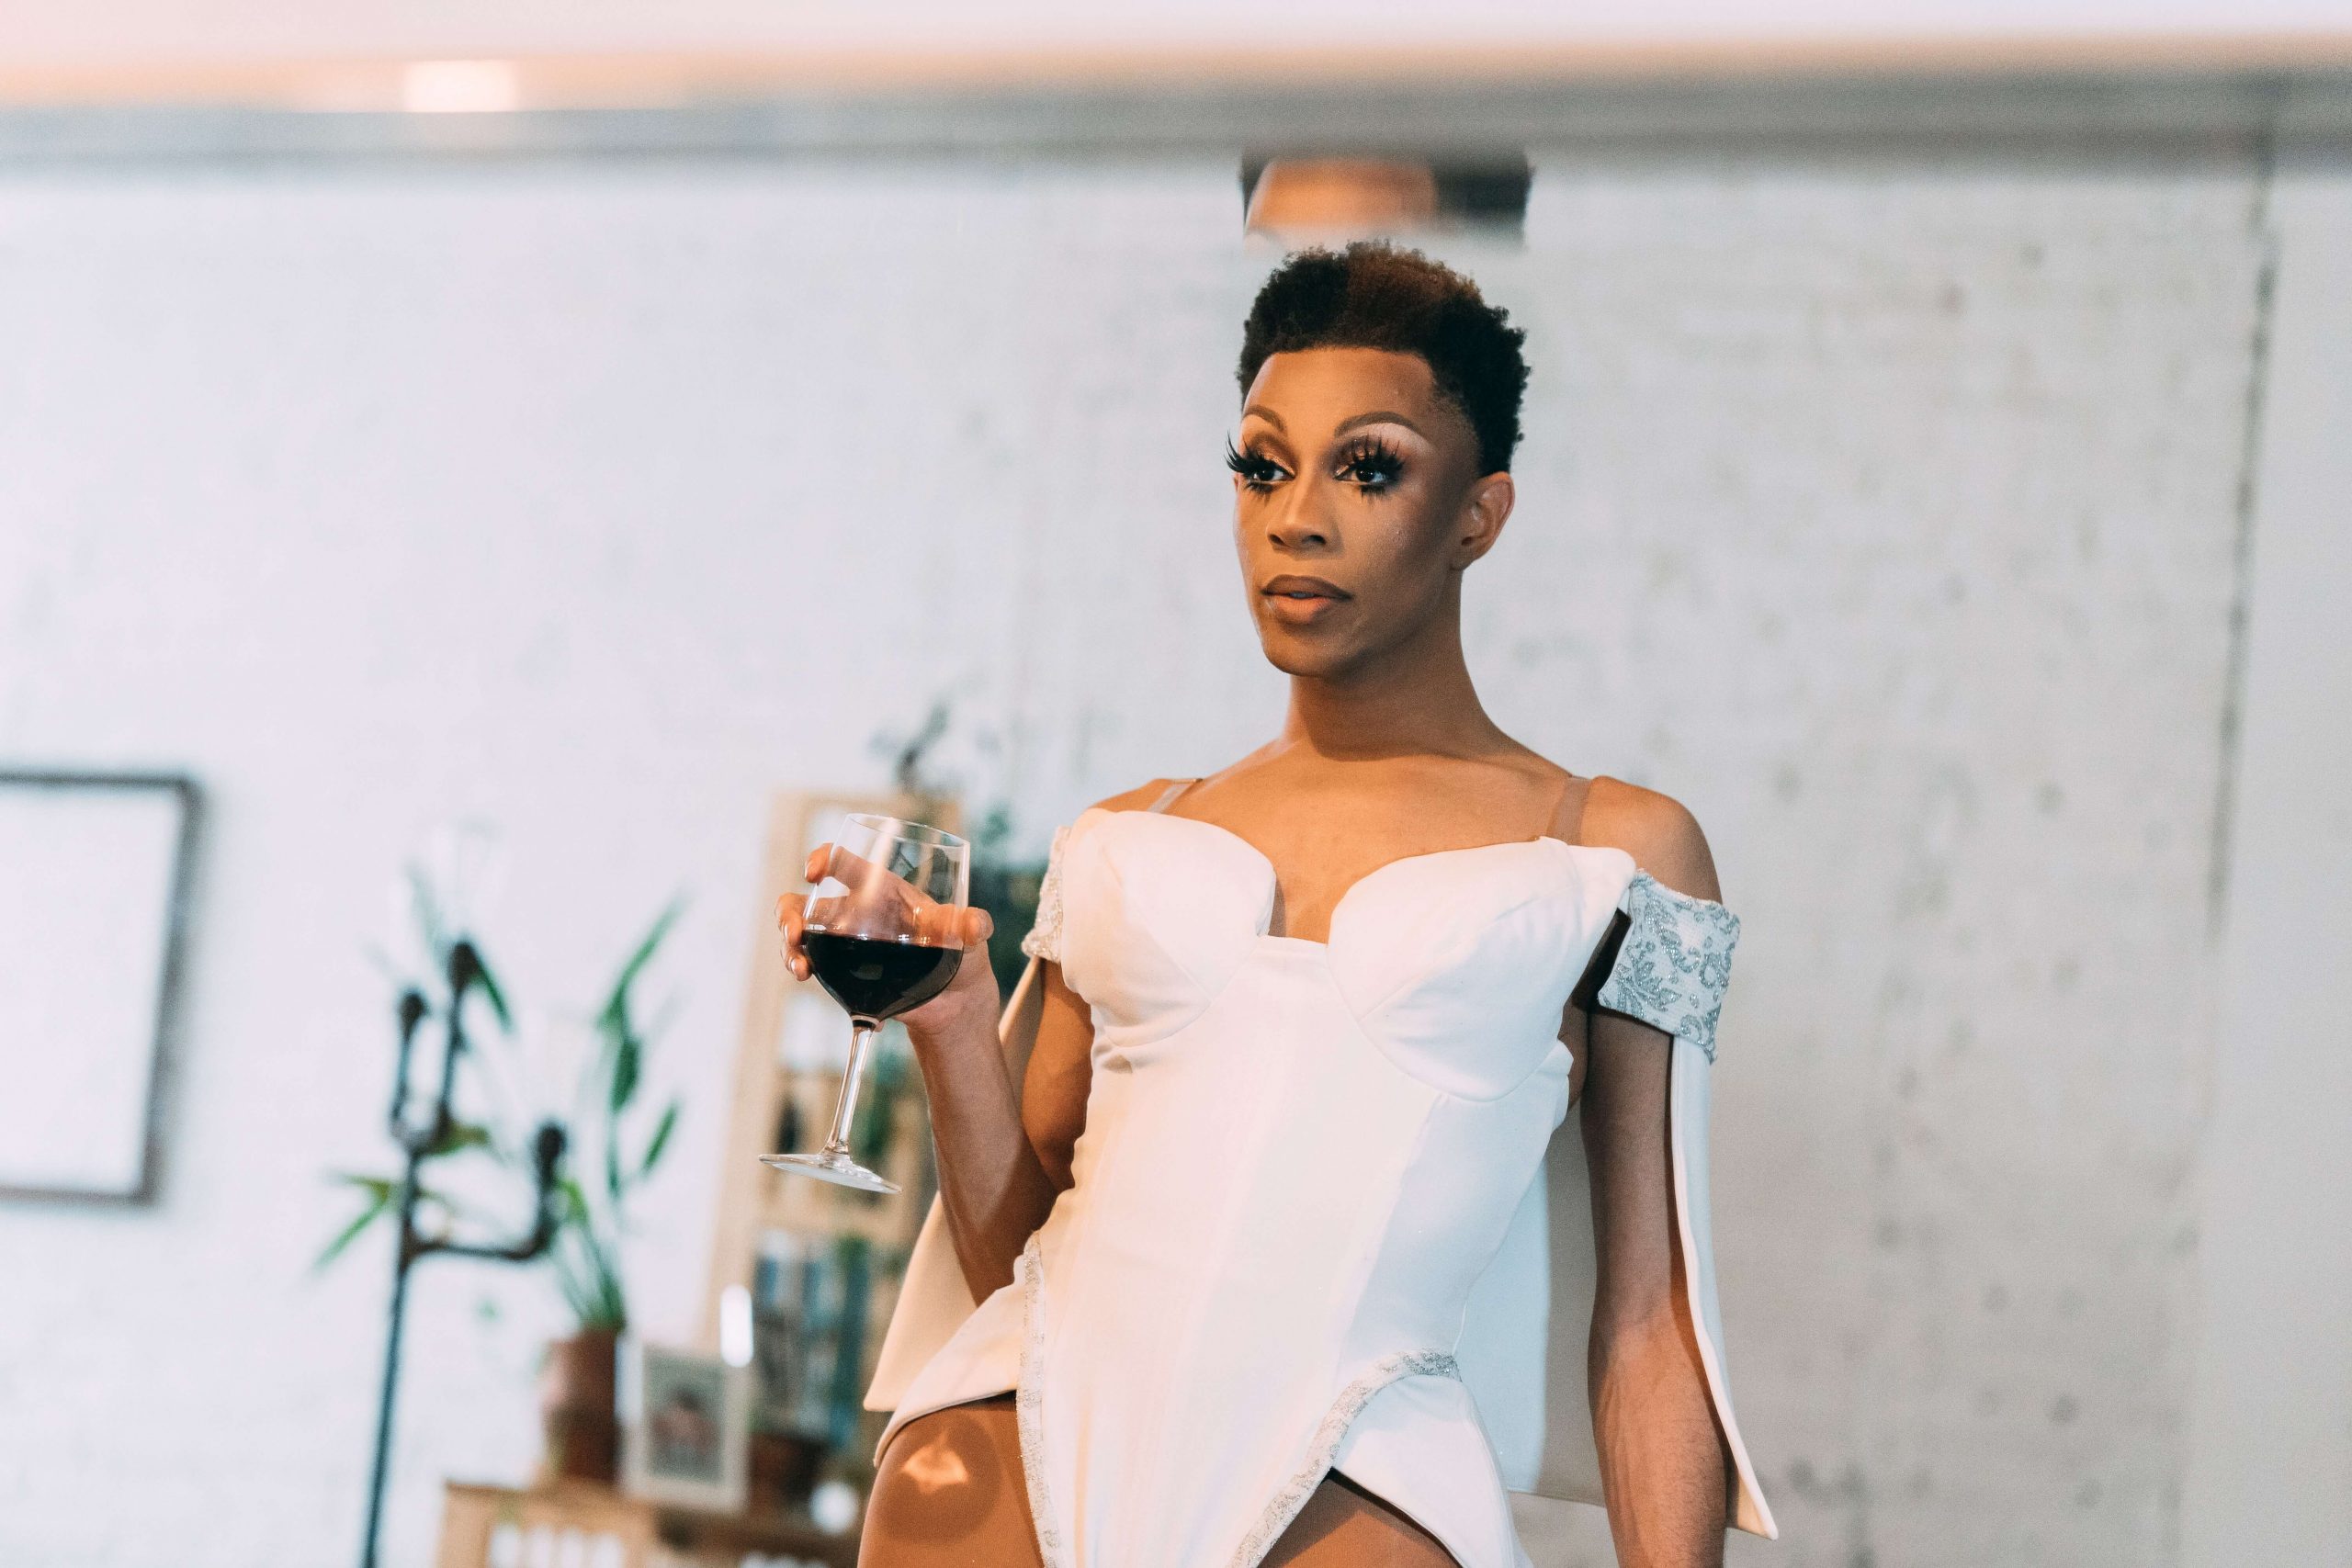 A black trans individual leans against a counter with a glass of wine representing the black LGBTQ community and their increased need for EMDR Therapy in Baltimore, MD to address trauma.